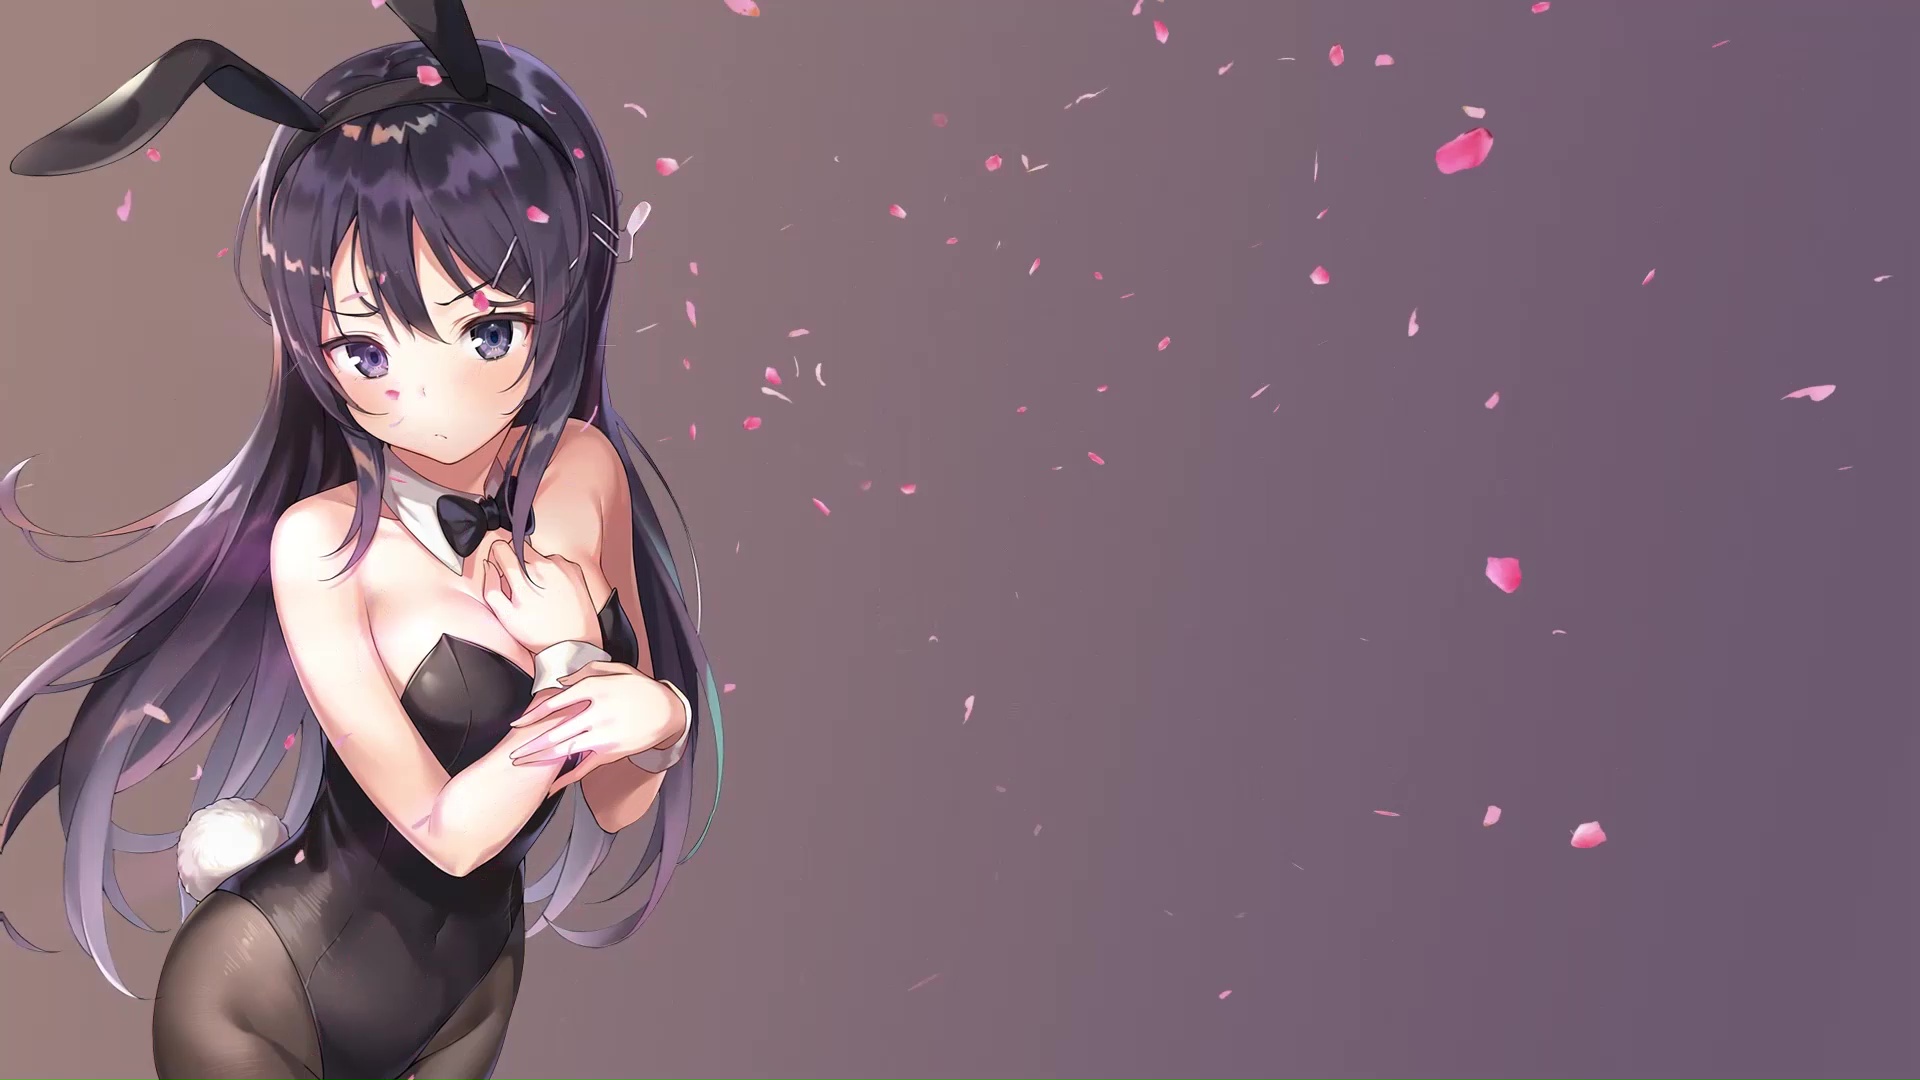 100+] Rascal Does Not Dream Of Bunny Girl Senpai Wallpapers | Wallpapers.com